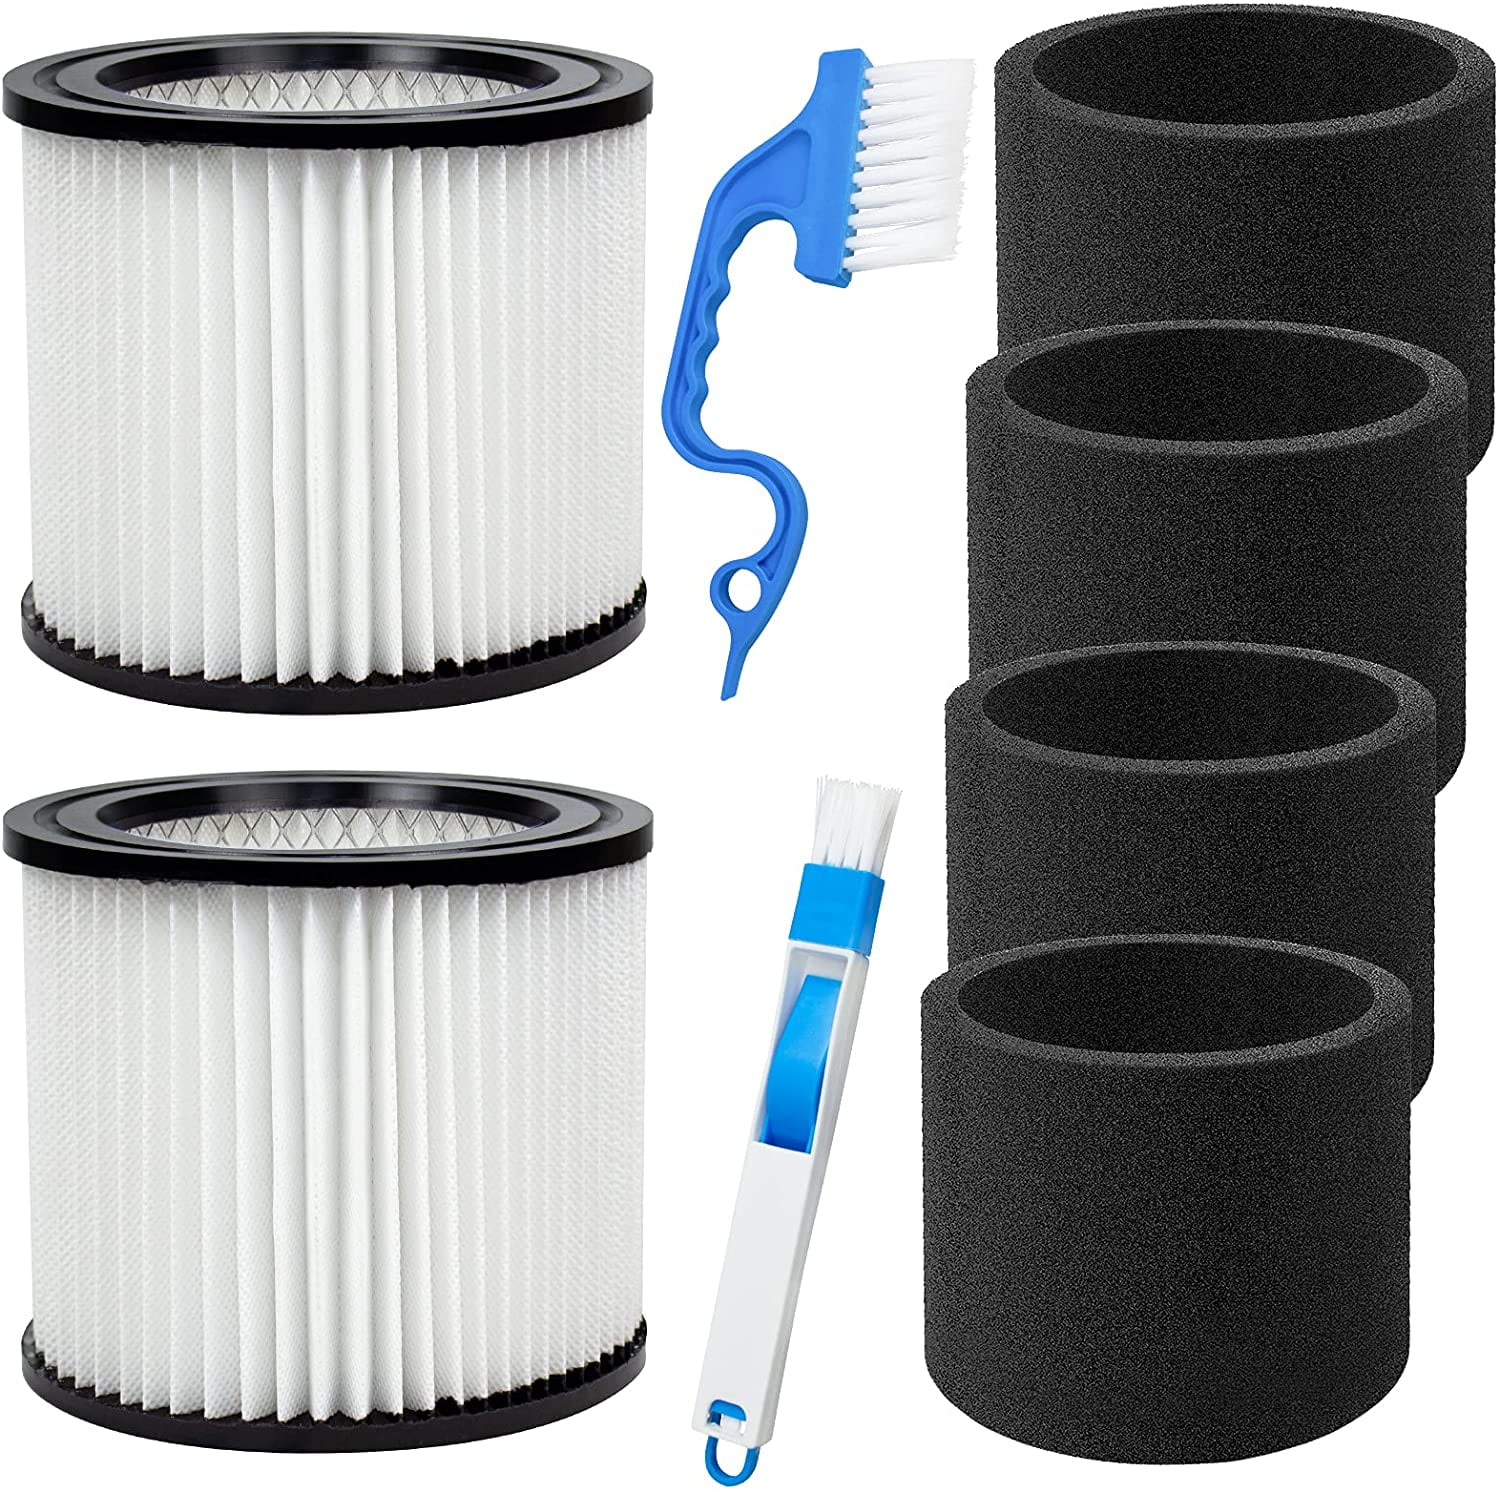 1,2, 4x HQRP Filters Sleeves for Shop-Vac 4045a 464b 464d 8040 8045 8045 a 8050a 